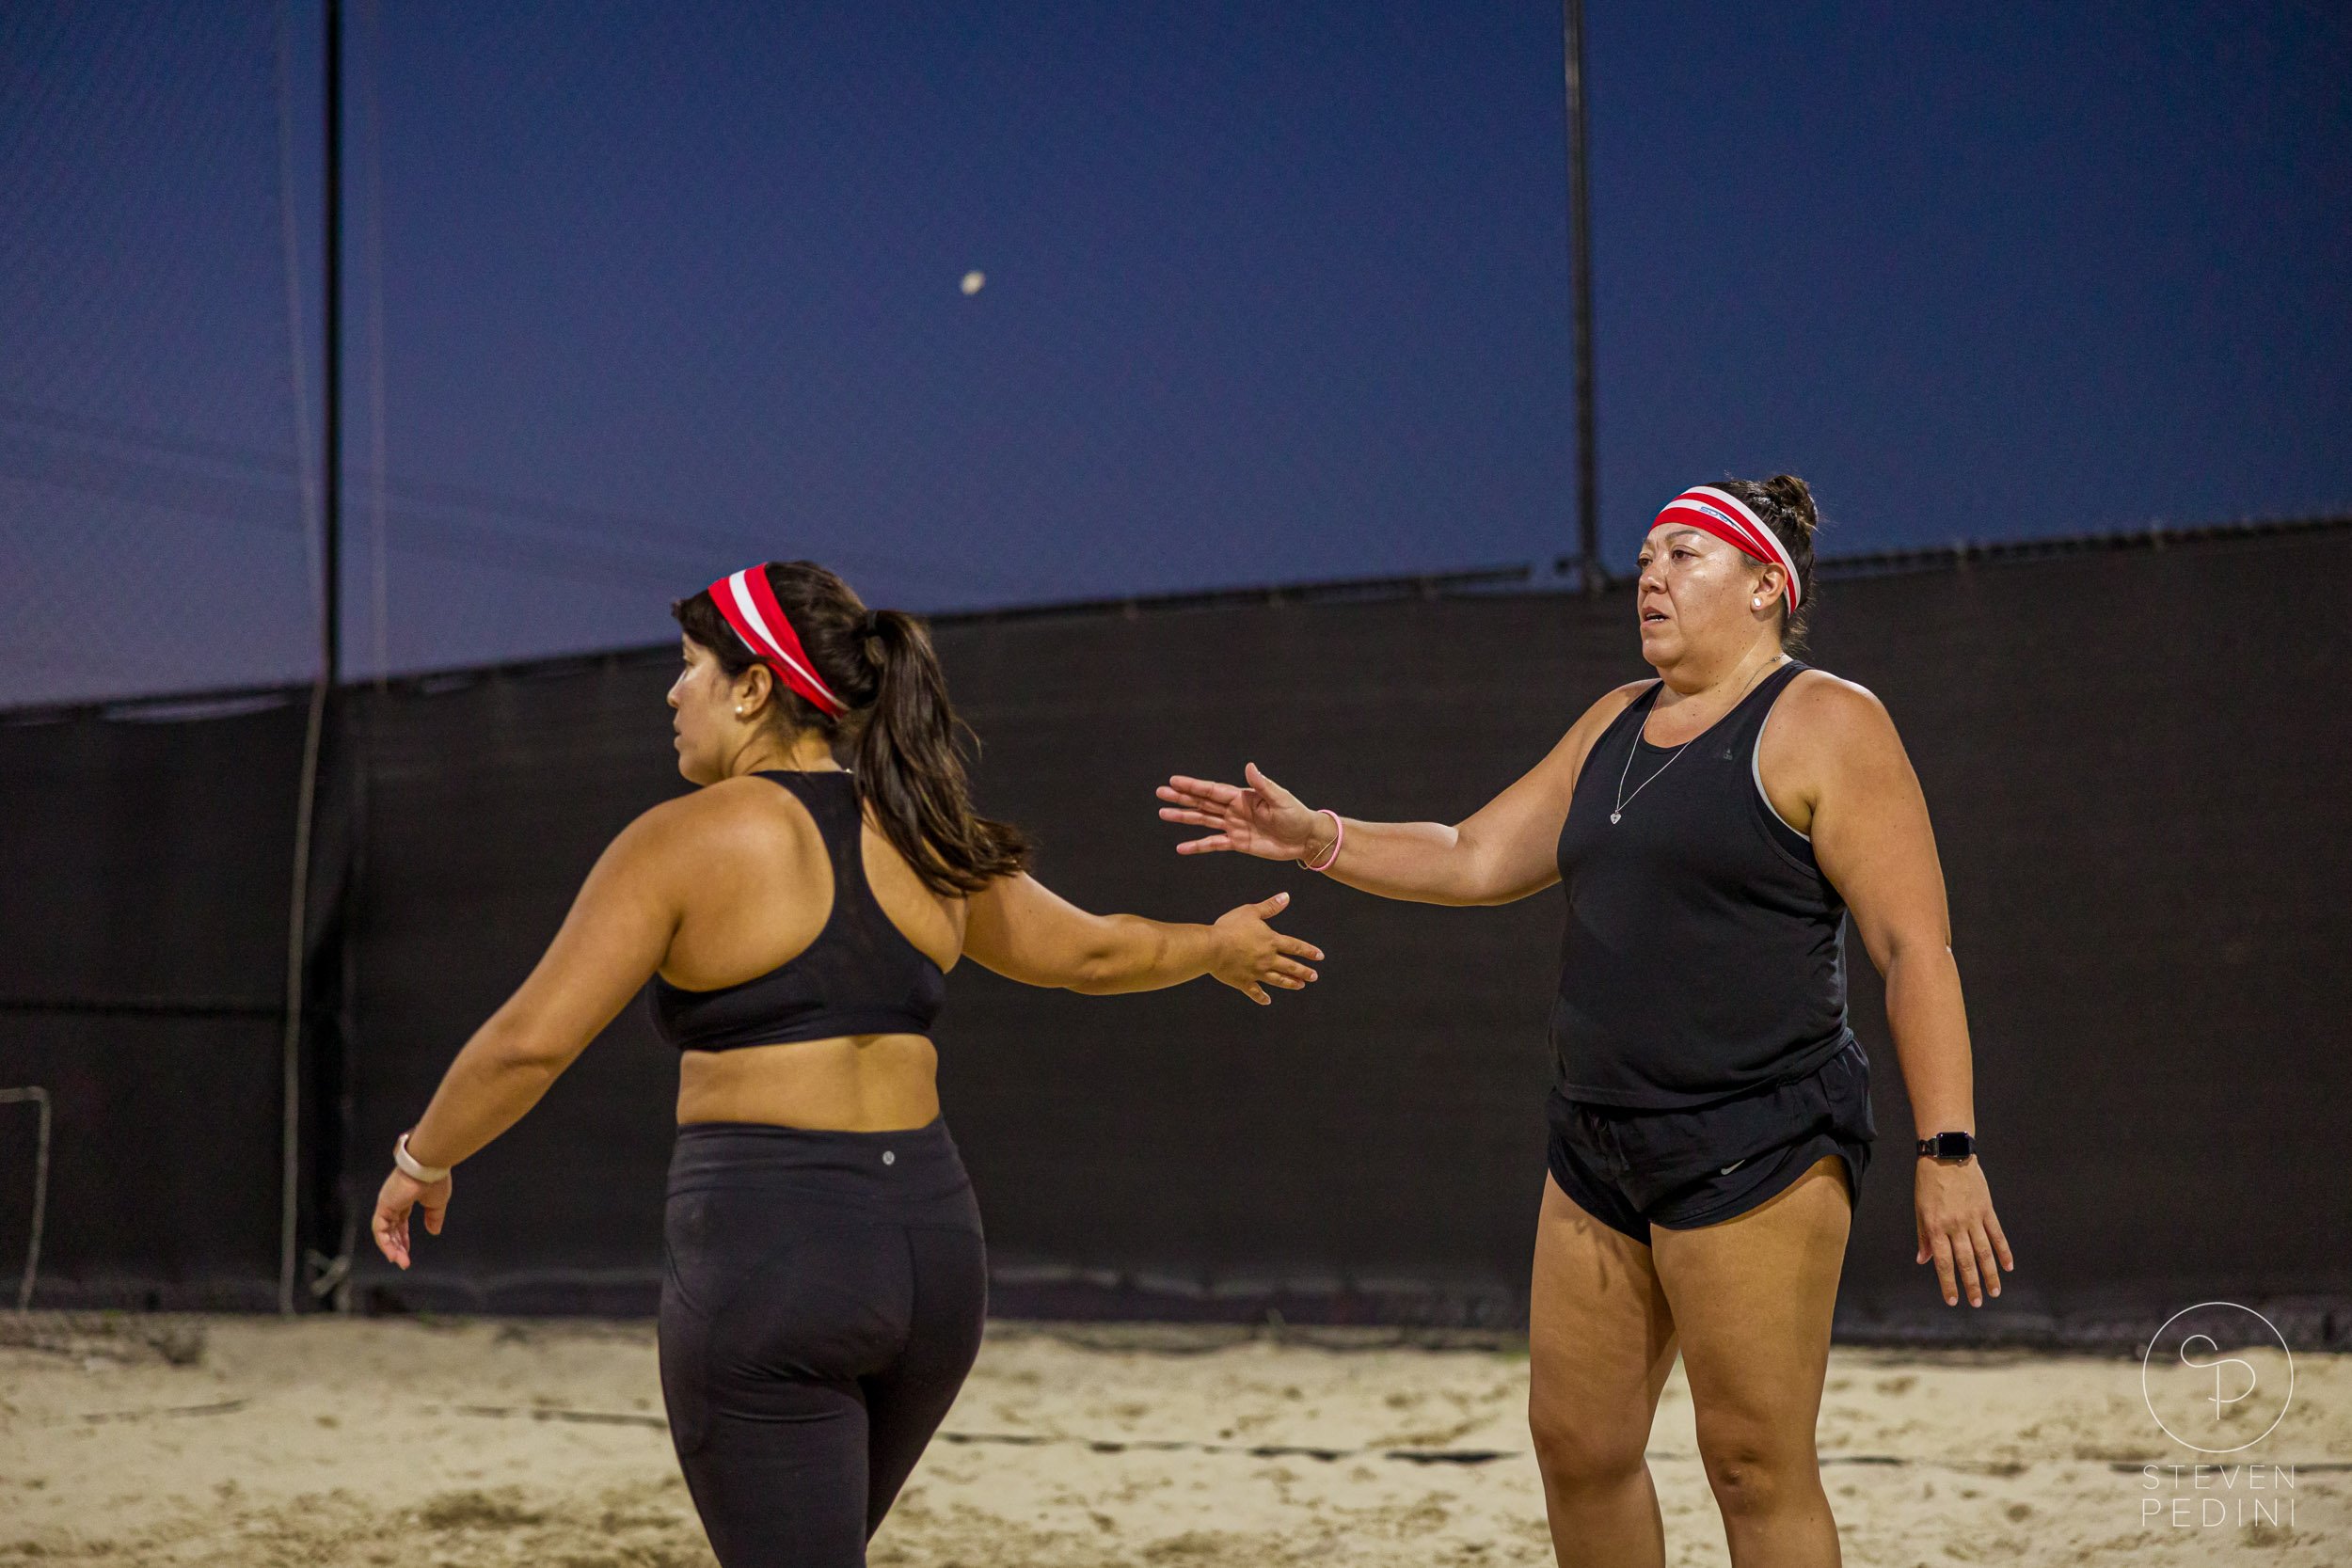 Steven Pedini Photography - Bumpy Pickle - Sand Volleyball - Houston TX - World Cup of Volleyball - 00315.jpg